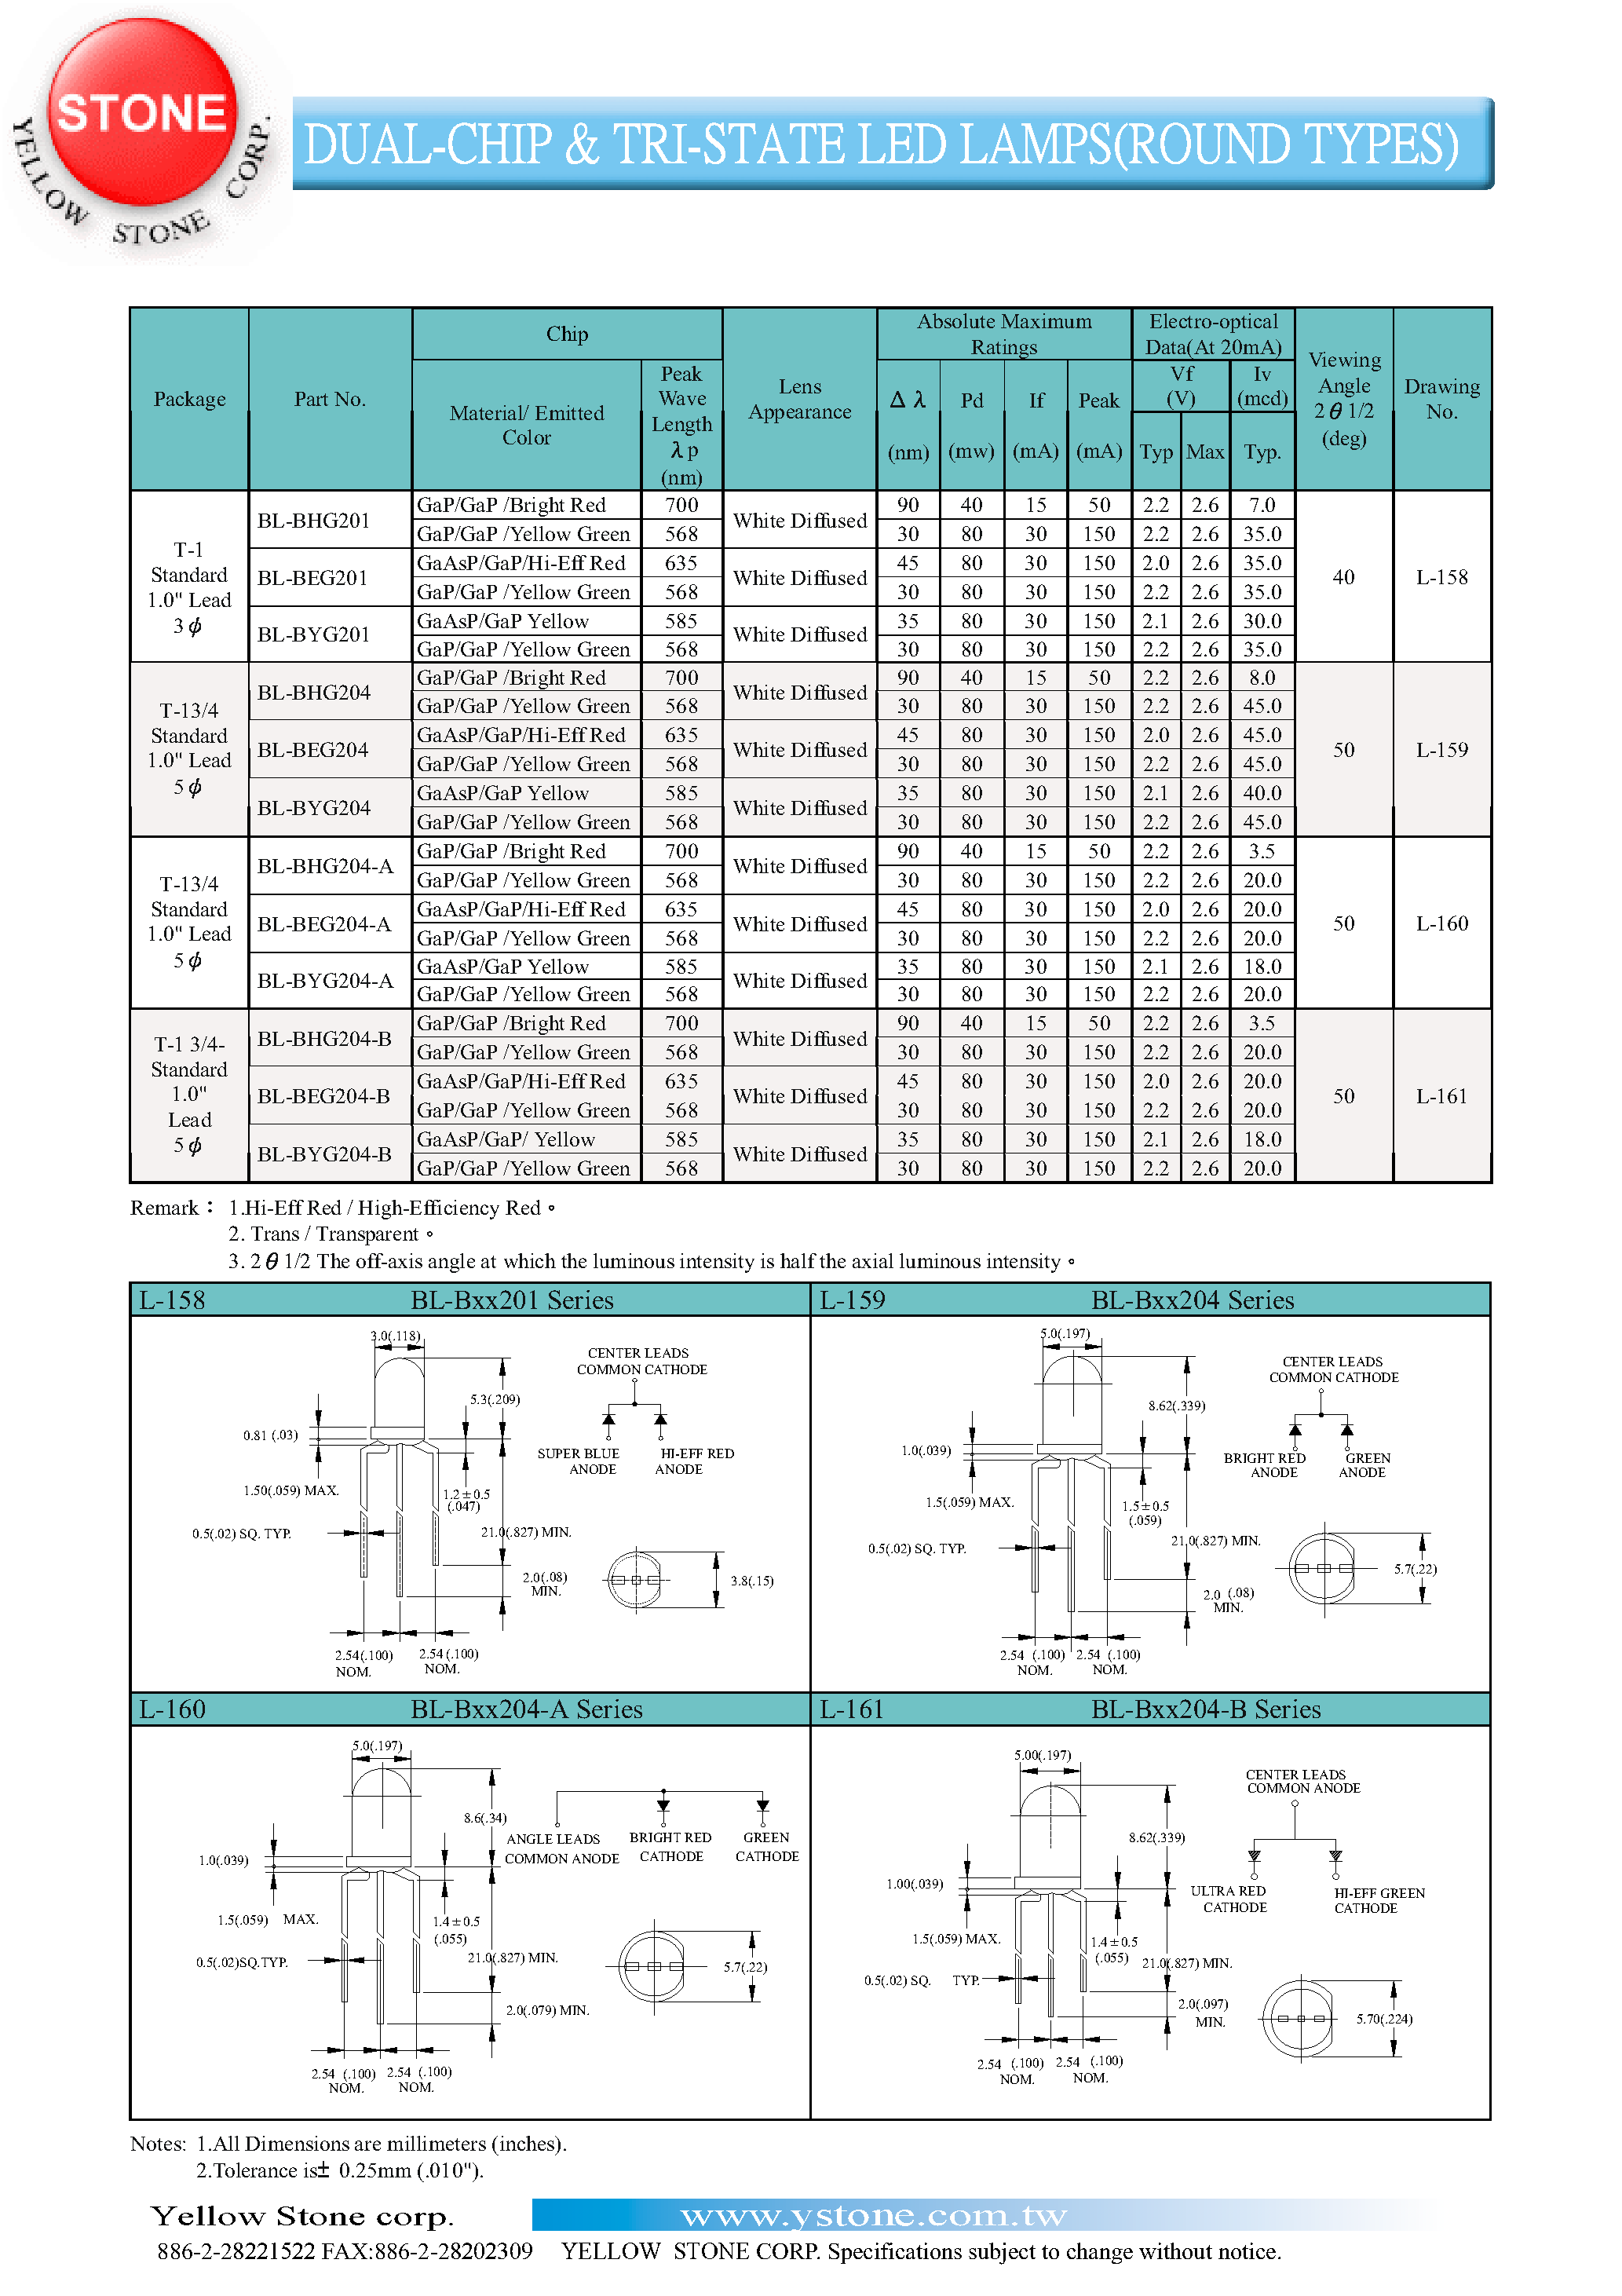 Datasheet BL-BYG204-B - DUAL CHIP TRI STATE LED LAMPS page 1